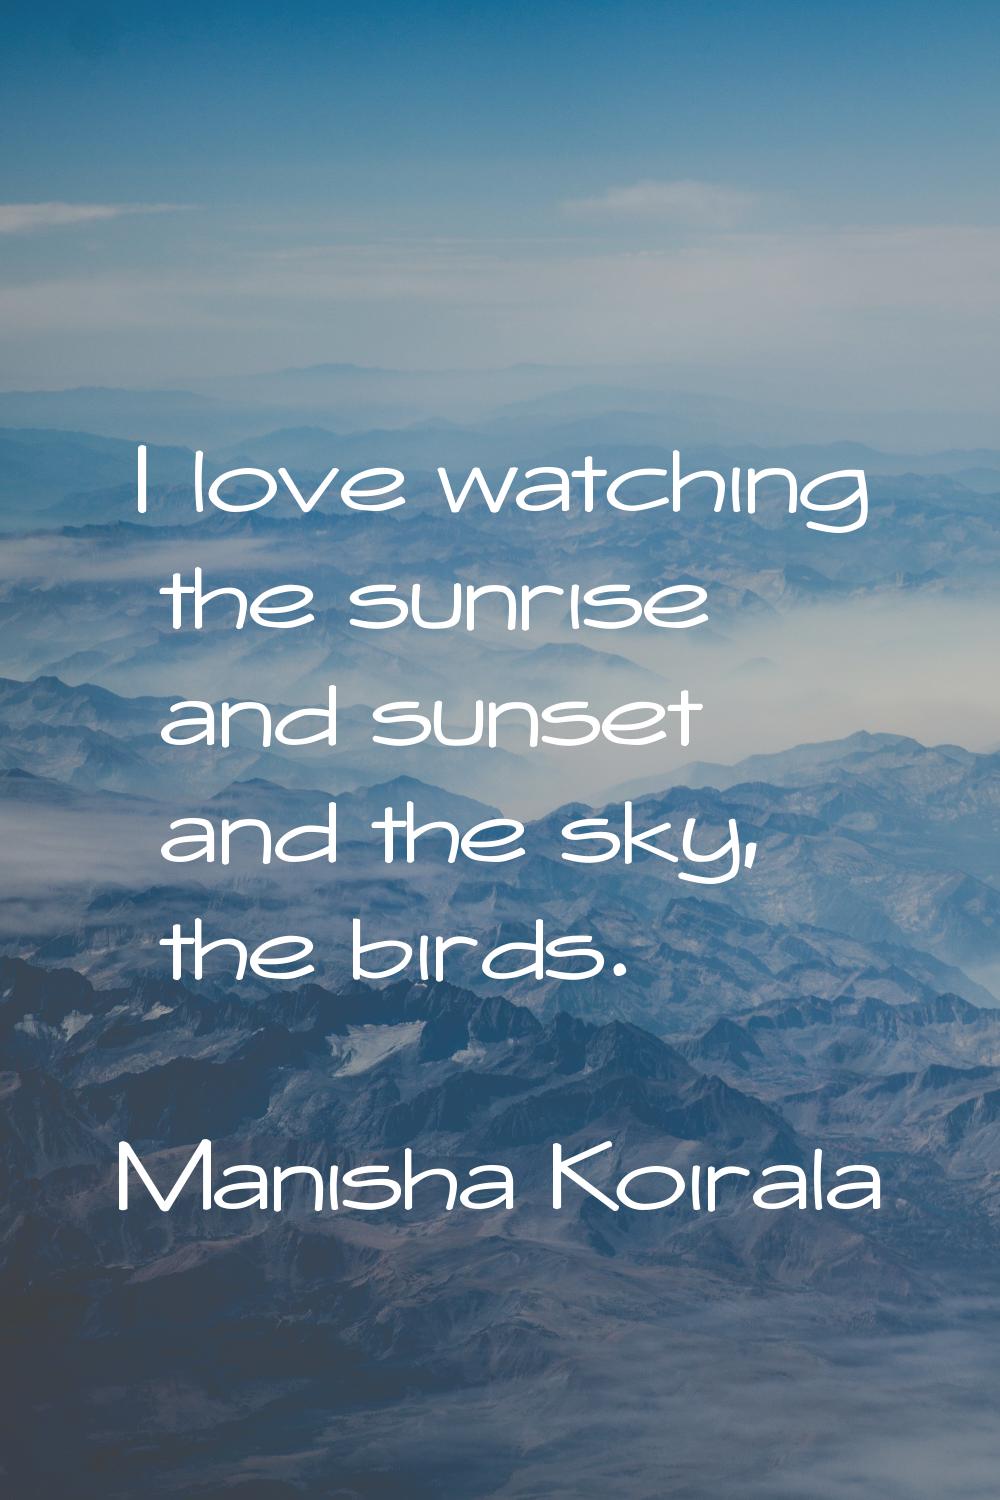 I love watching the sunrise and sunset and the sky, the birds.